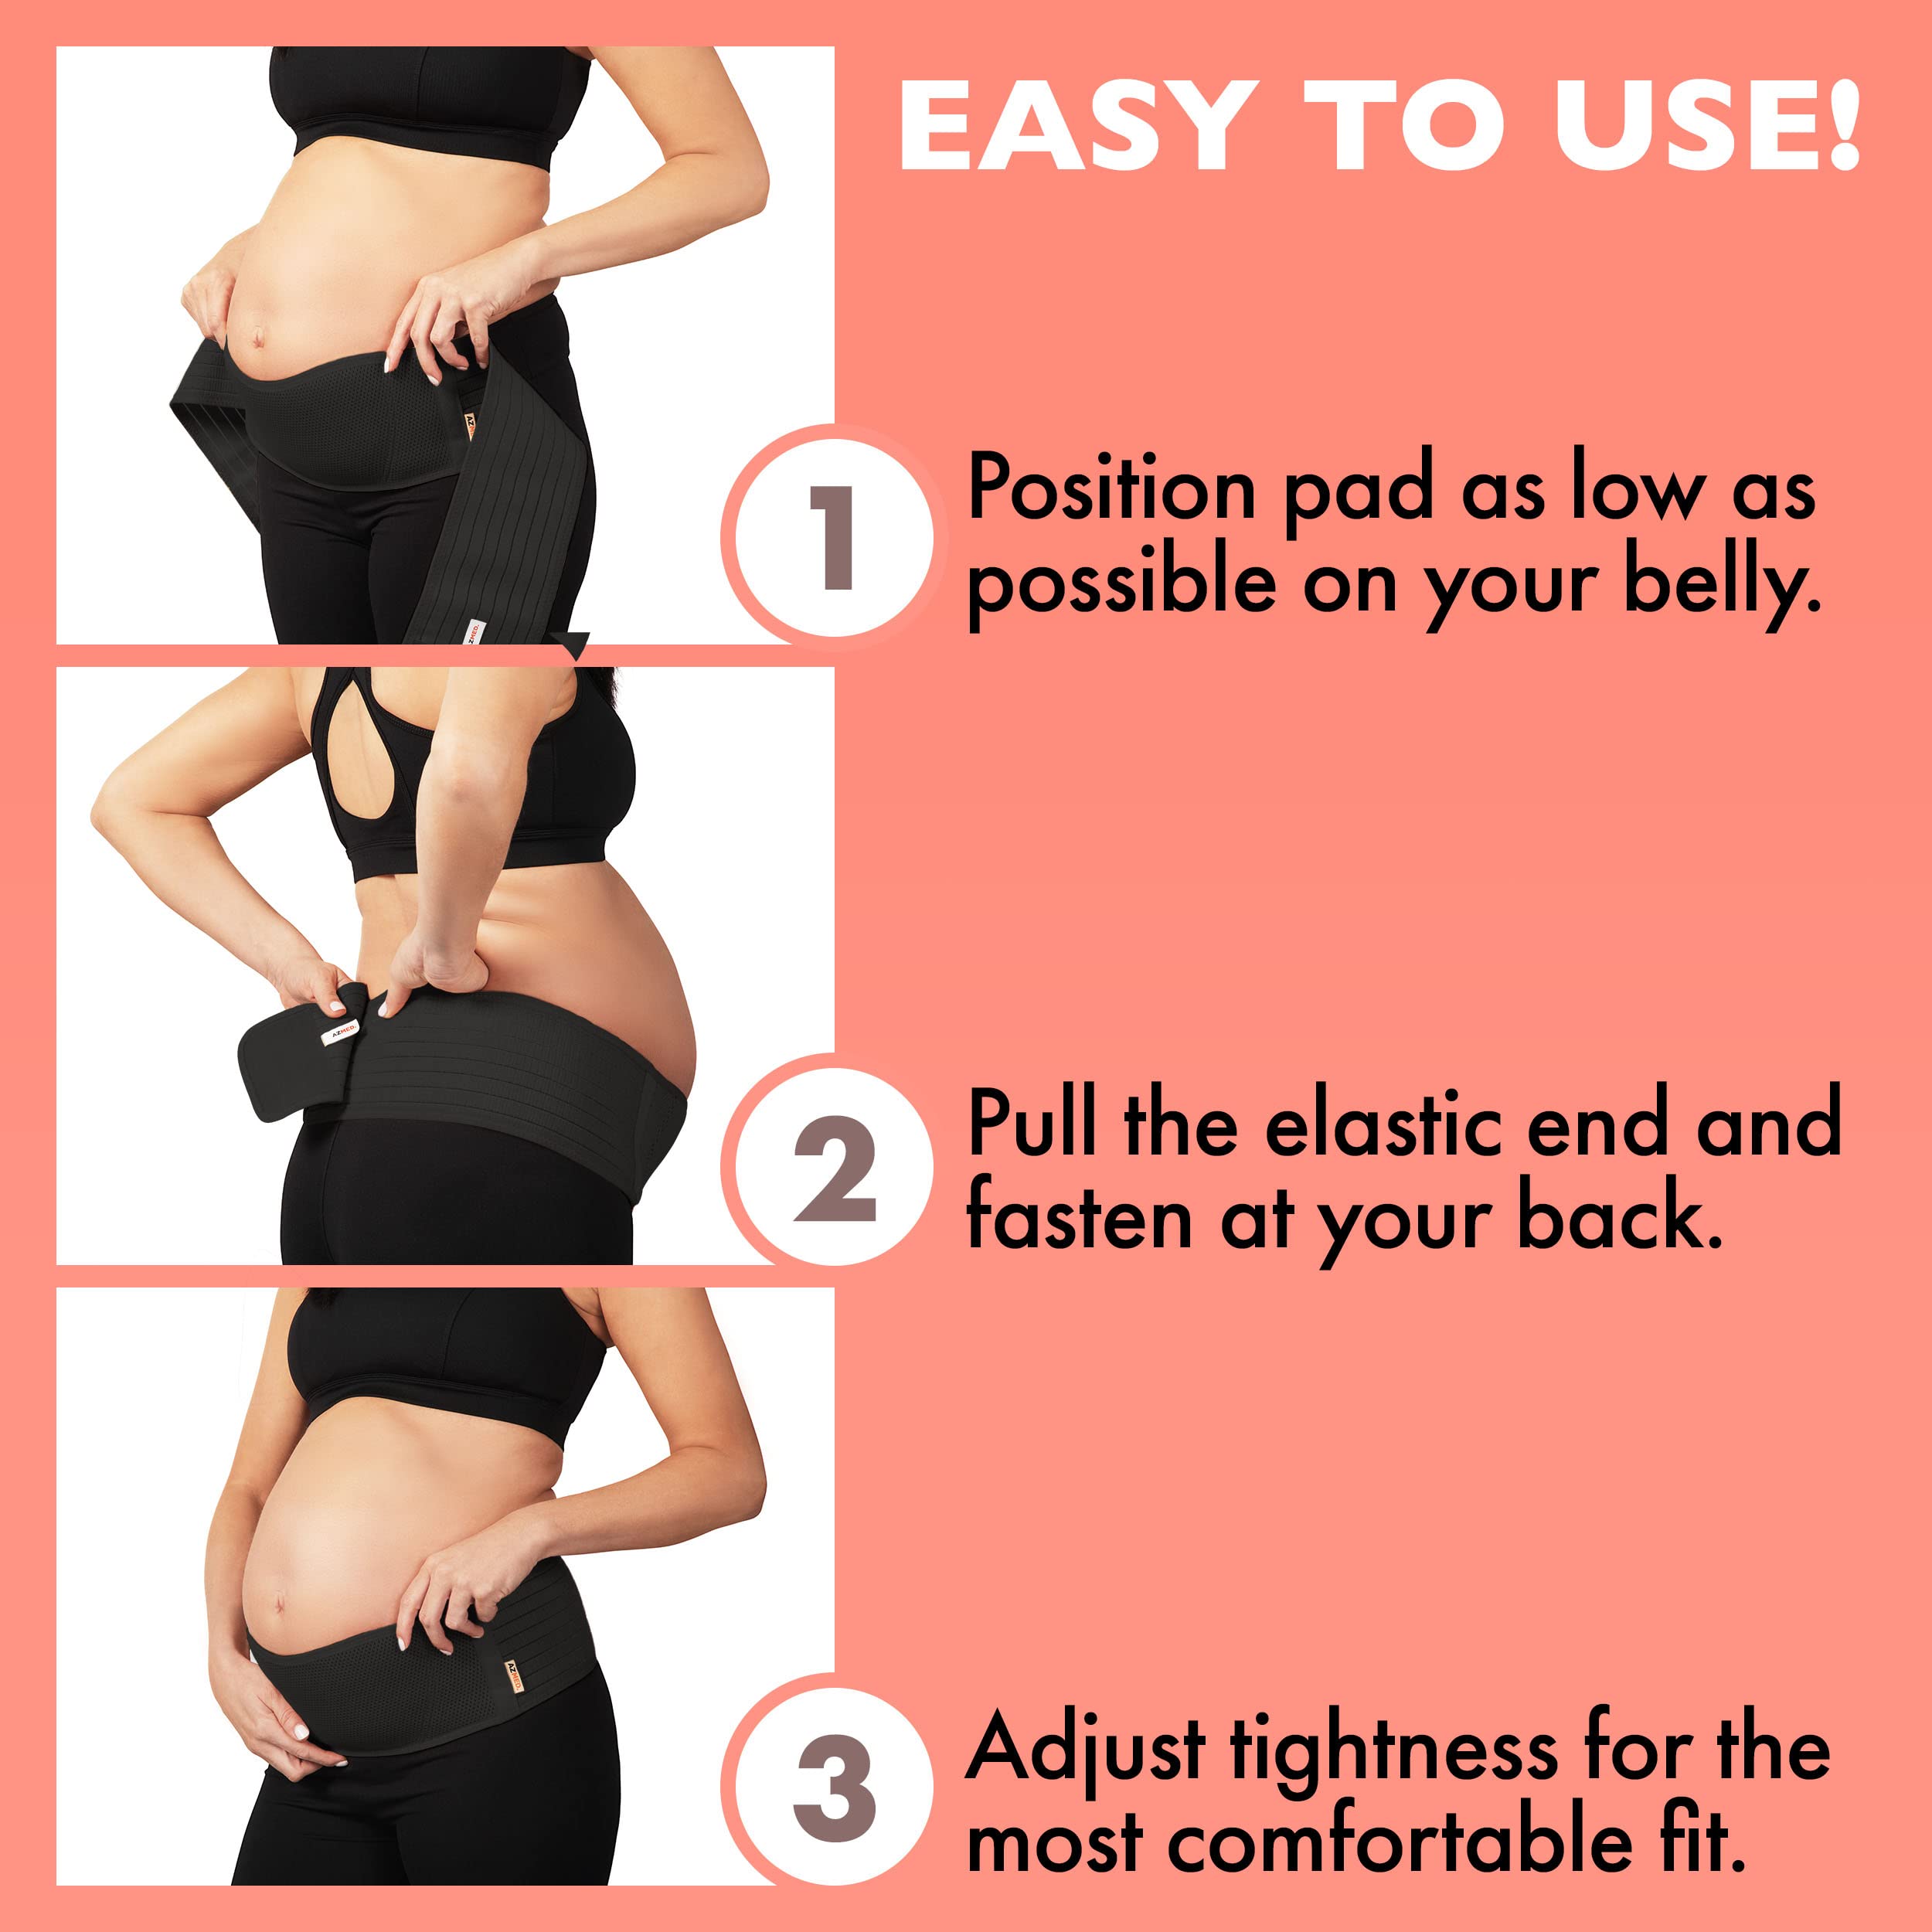 AZMED Maternity Belly Band for Pregnant Women - Breathable Pregnancy Belly Support Band for Abdomen, Pelvic, Waist, & Back Pain - Adjustable Maternity Belt - Belly Band Pregnancy Support (Black)